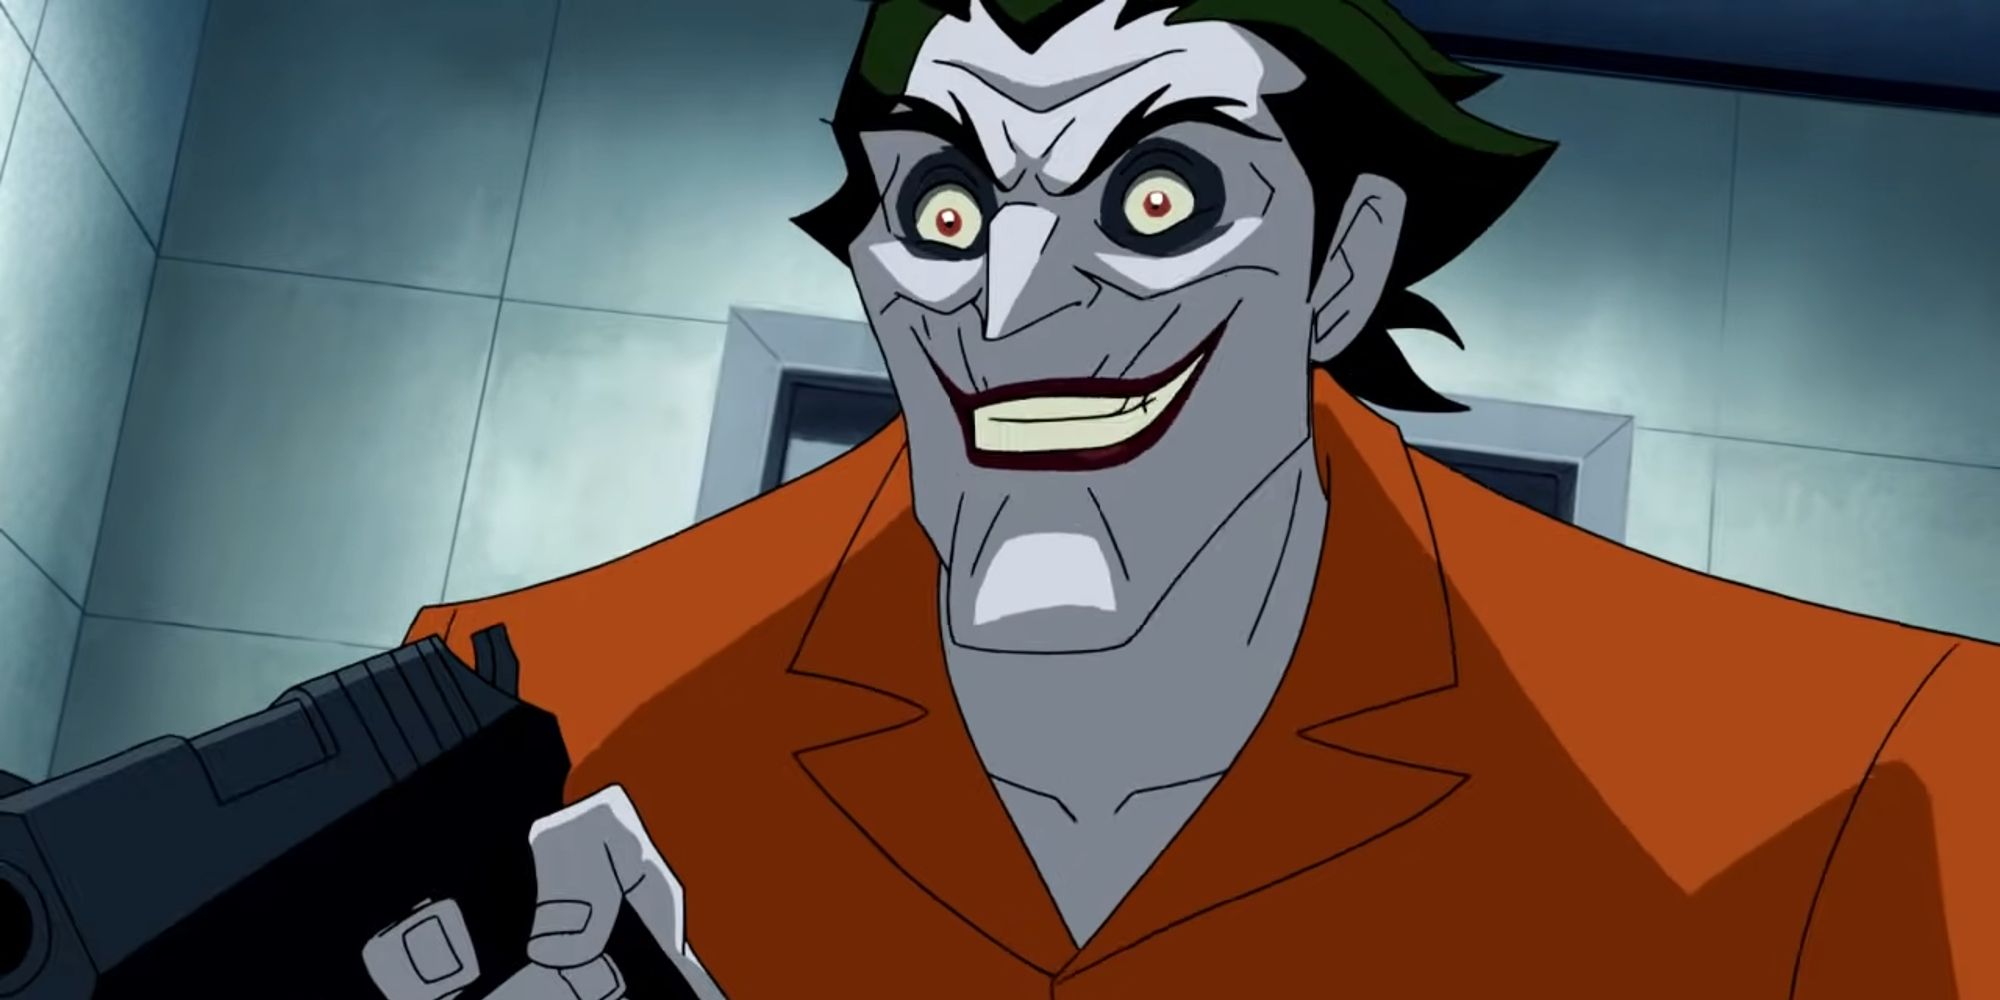 The Joker in his cell with a gun in Batman Under The Red Hood